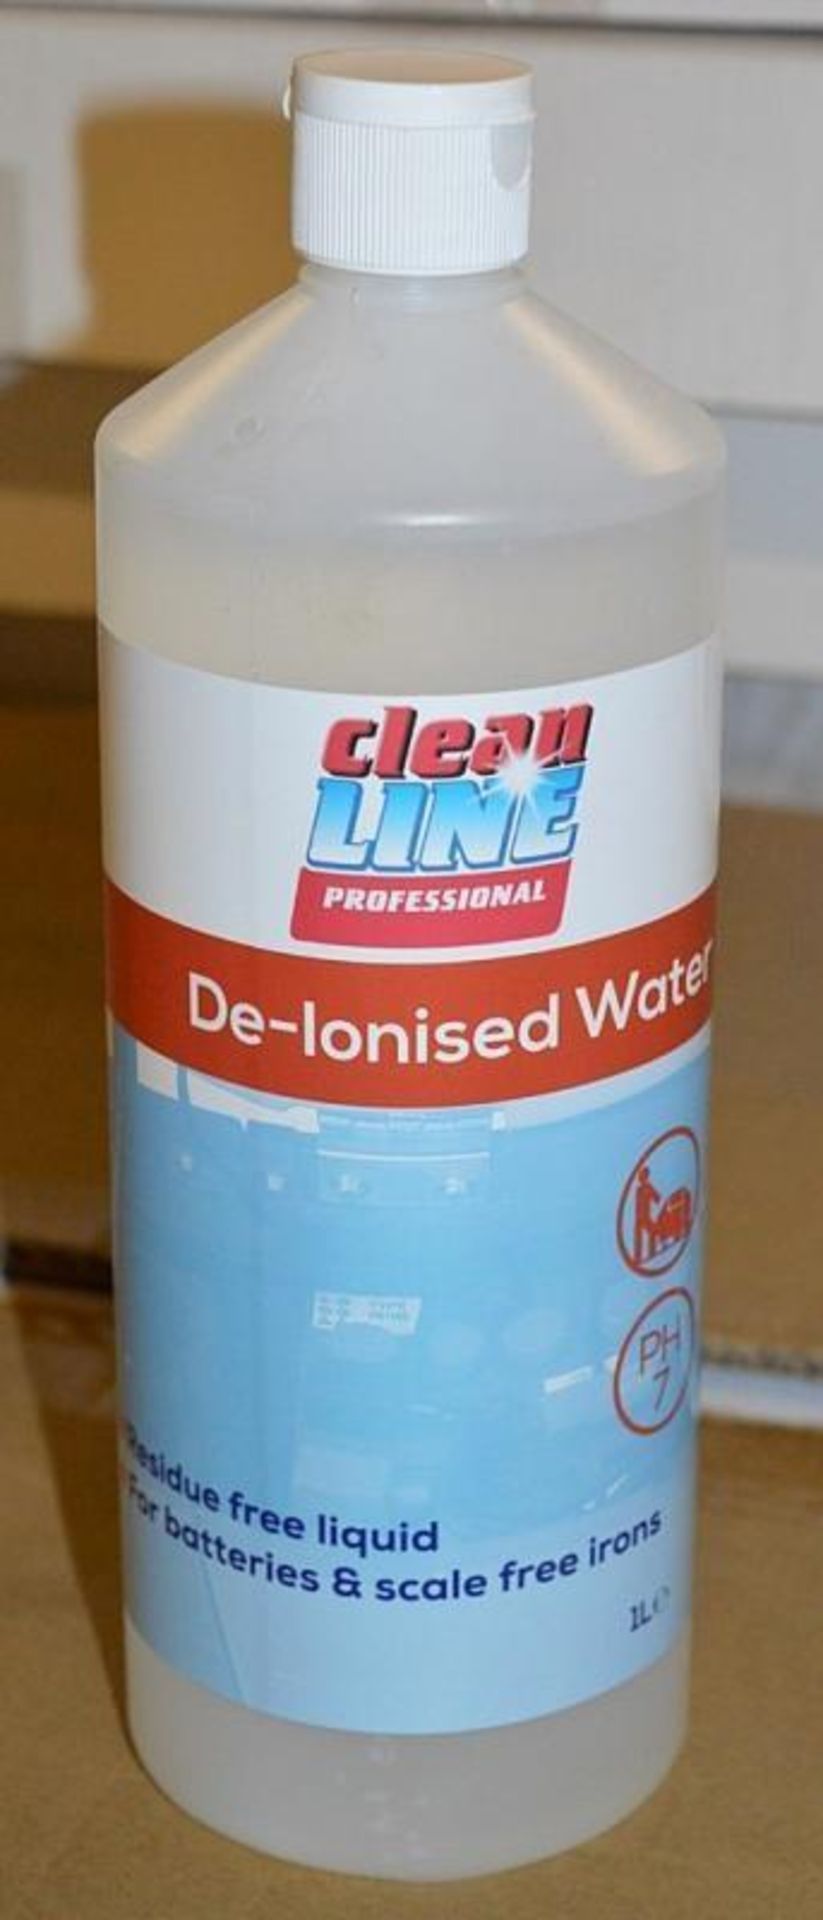 6 x 1-Litre Clean Line Professional Branded De-Ionised (Distilled) Water - New / Unused Stock - CL08